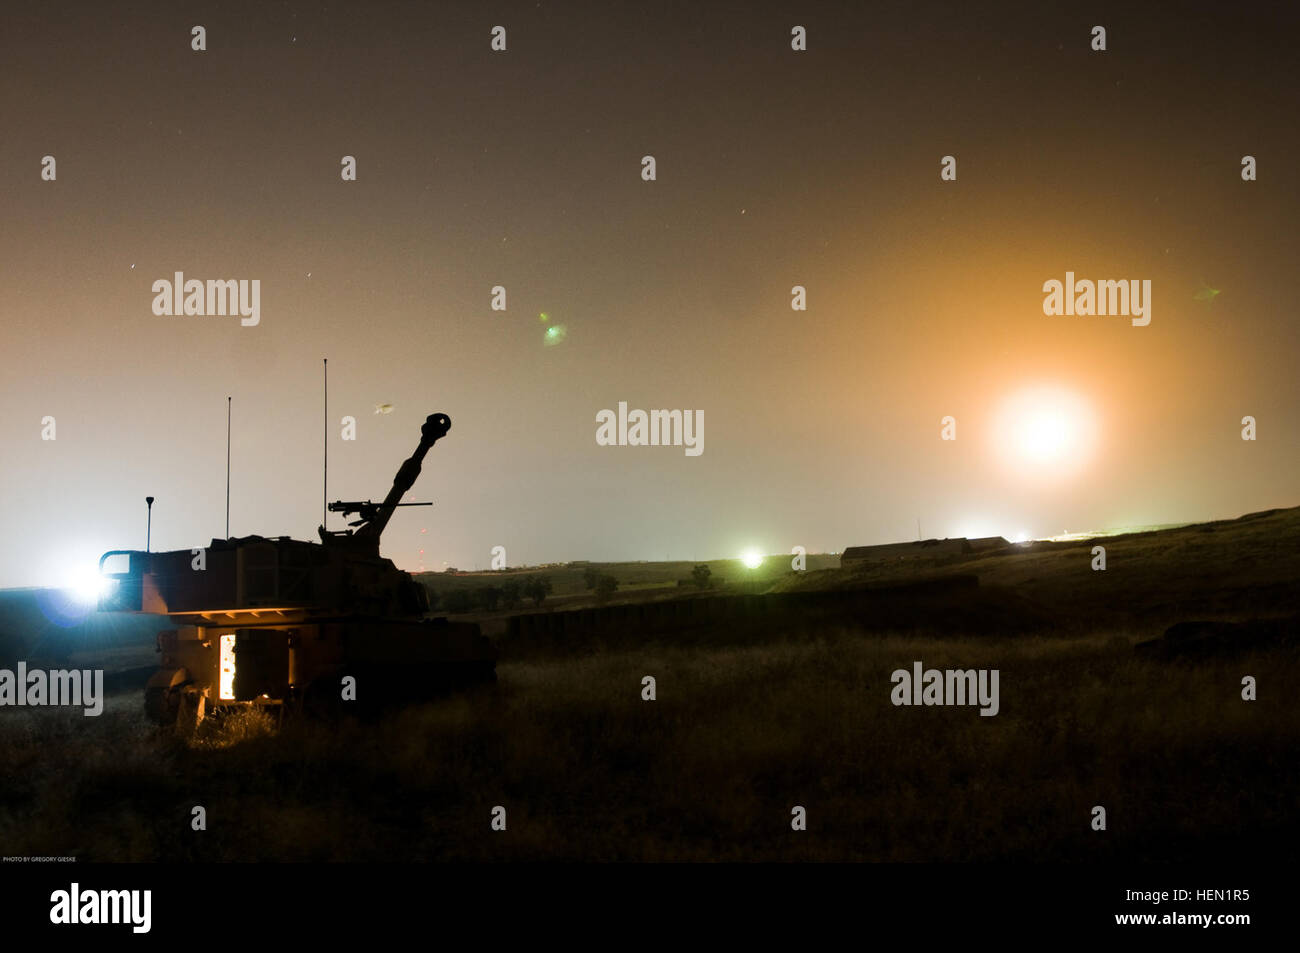 Moments after blasting a Howitzer round from 1st Battalion, 9th Field Artillery, 2nd Heavy Brigade Combat Team, 3rd Infantry Division's Canon Artillery System, an illumination flare is seen falling towards the earth over Contingency Operating Site Marez and Diamondback, Mosul, Iraq, May 8. Battle Kings Night Fire 278475 Stock Photo